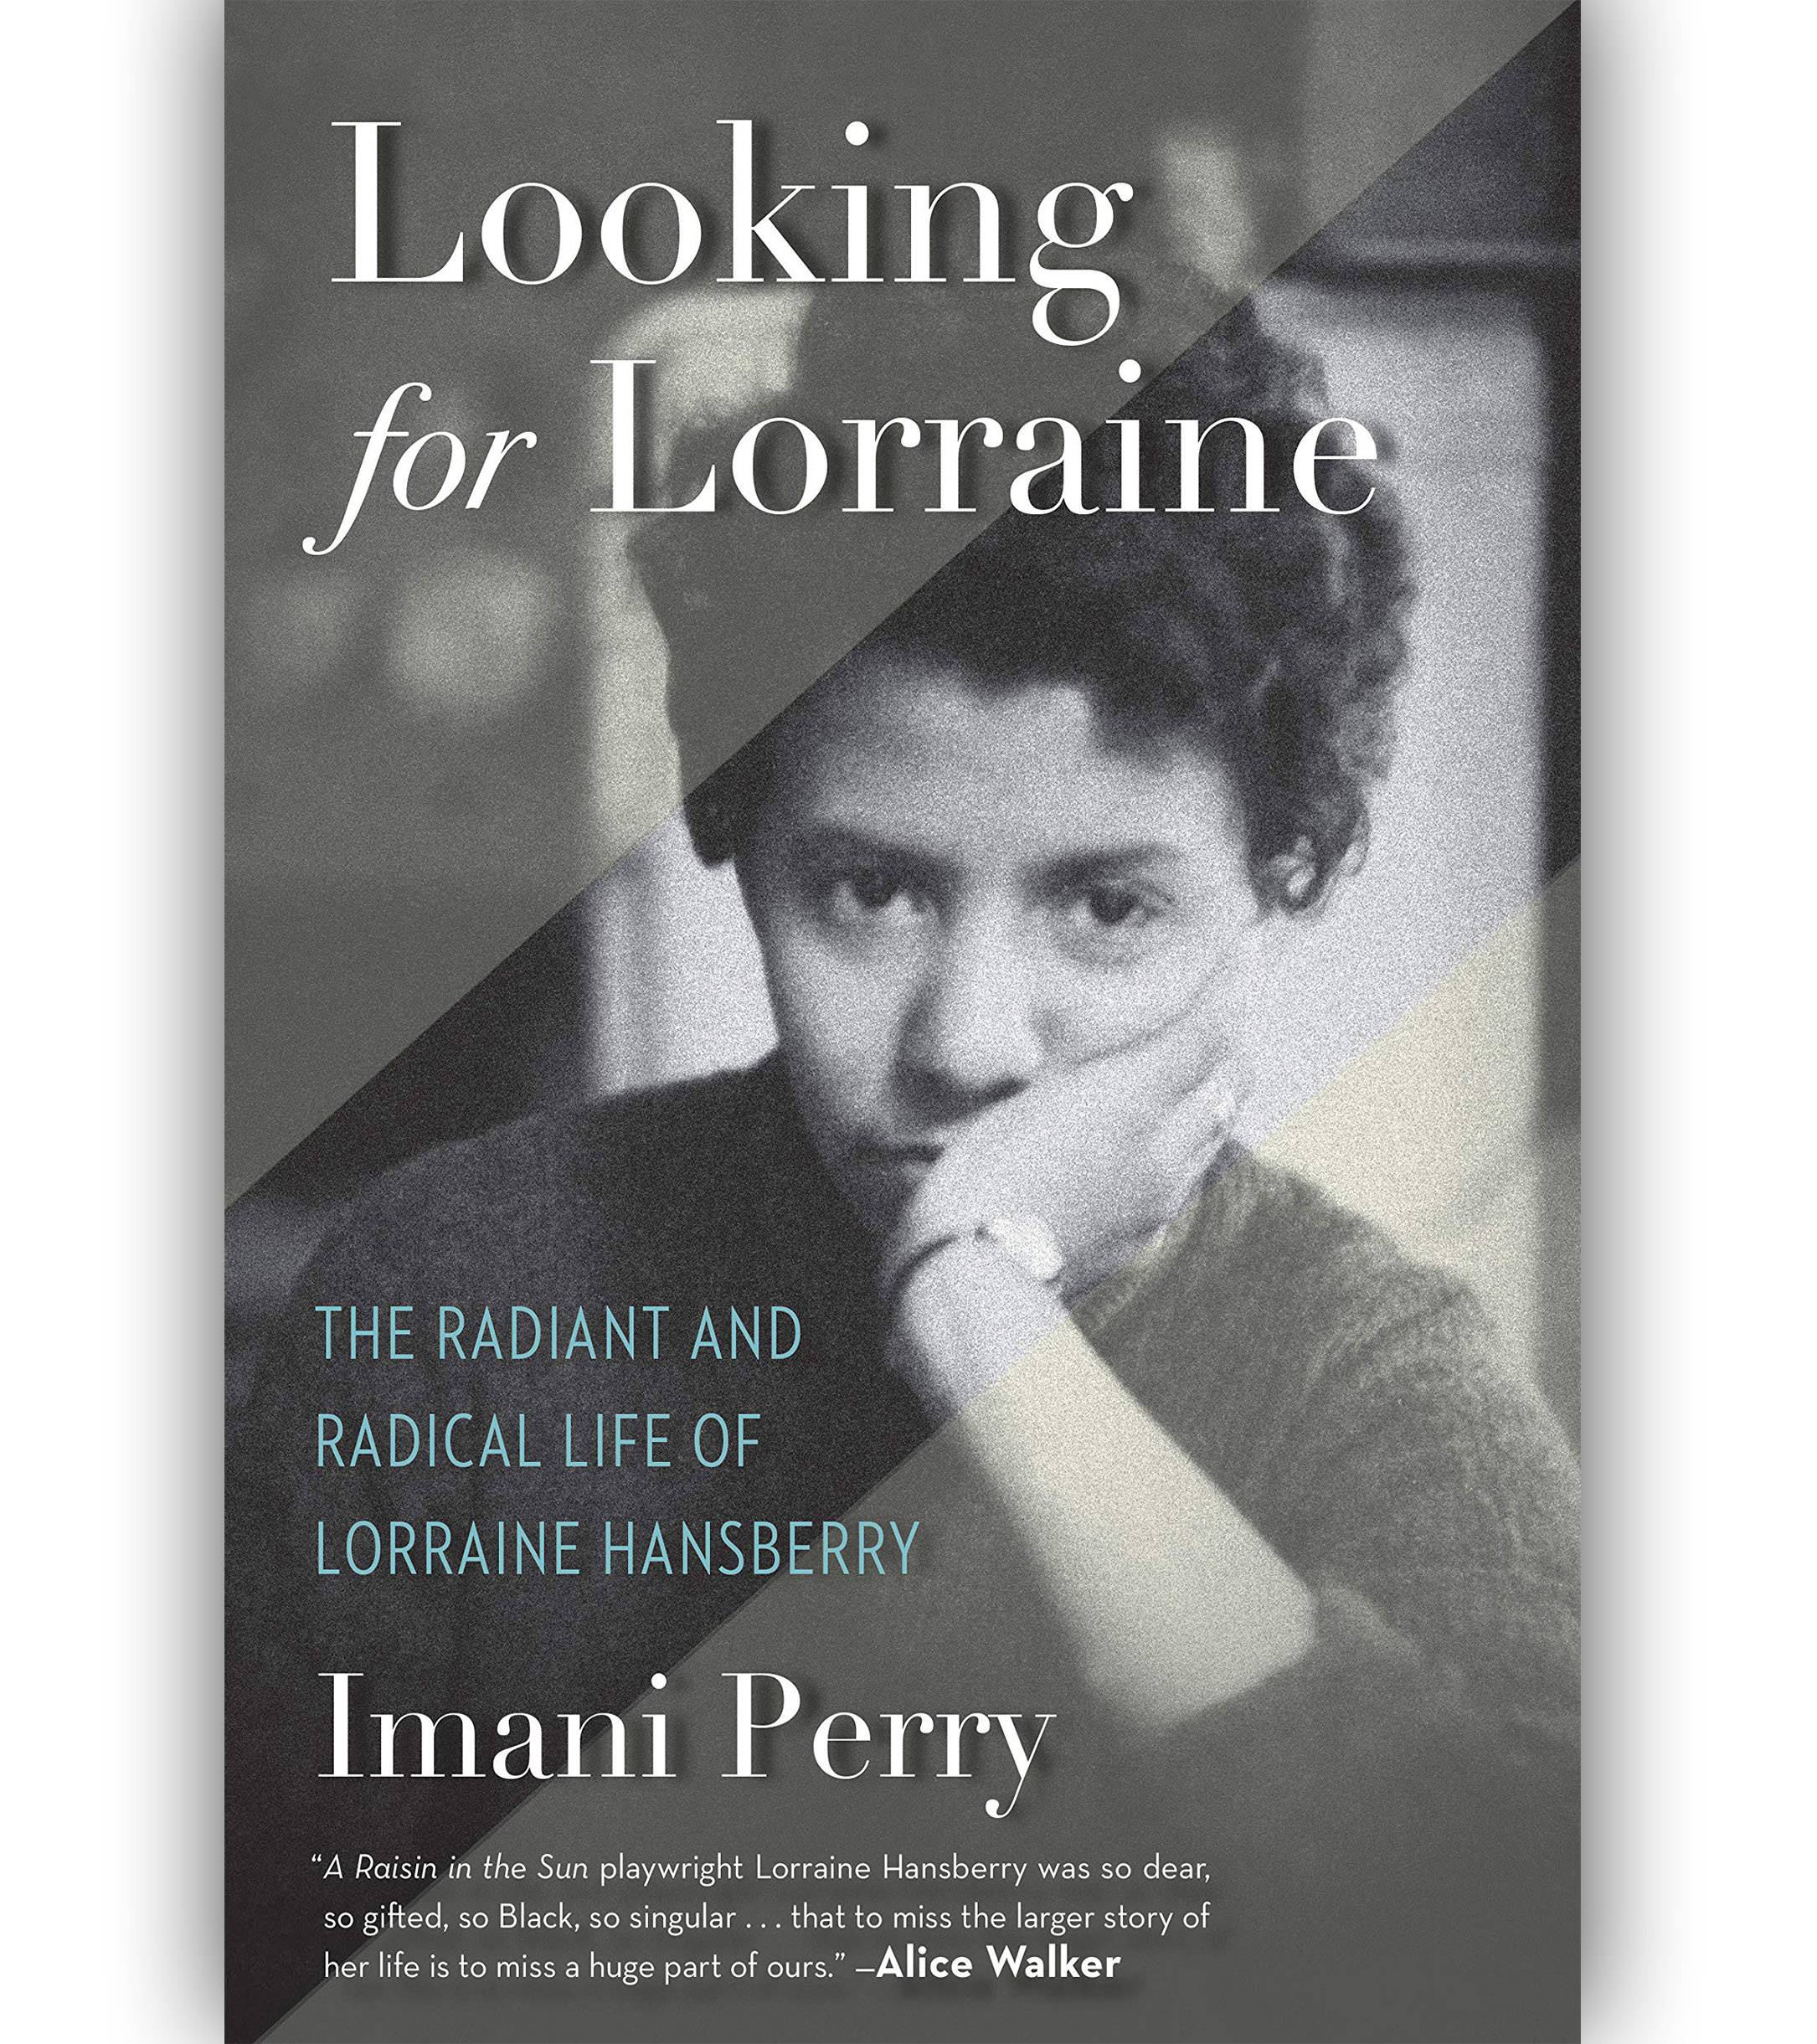 Looking For Lorraine: The Radiant and Radical Life of Lorraine Hansberry by Imani Perry Book Cover